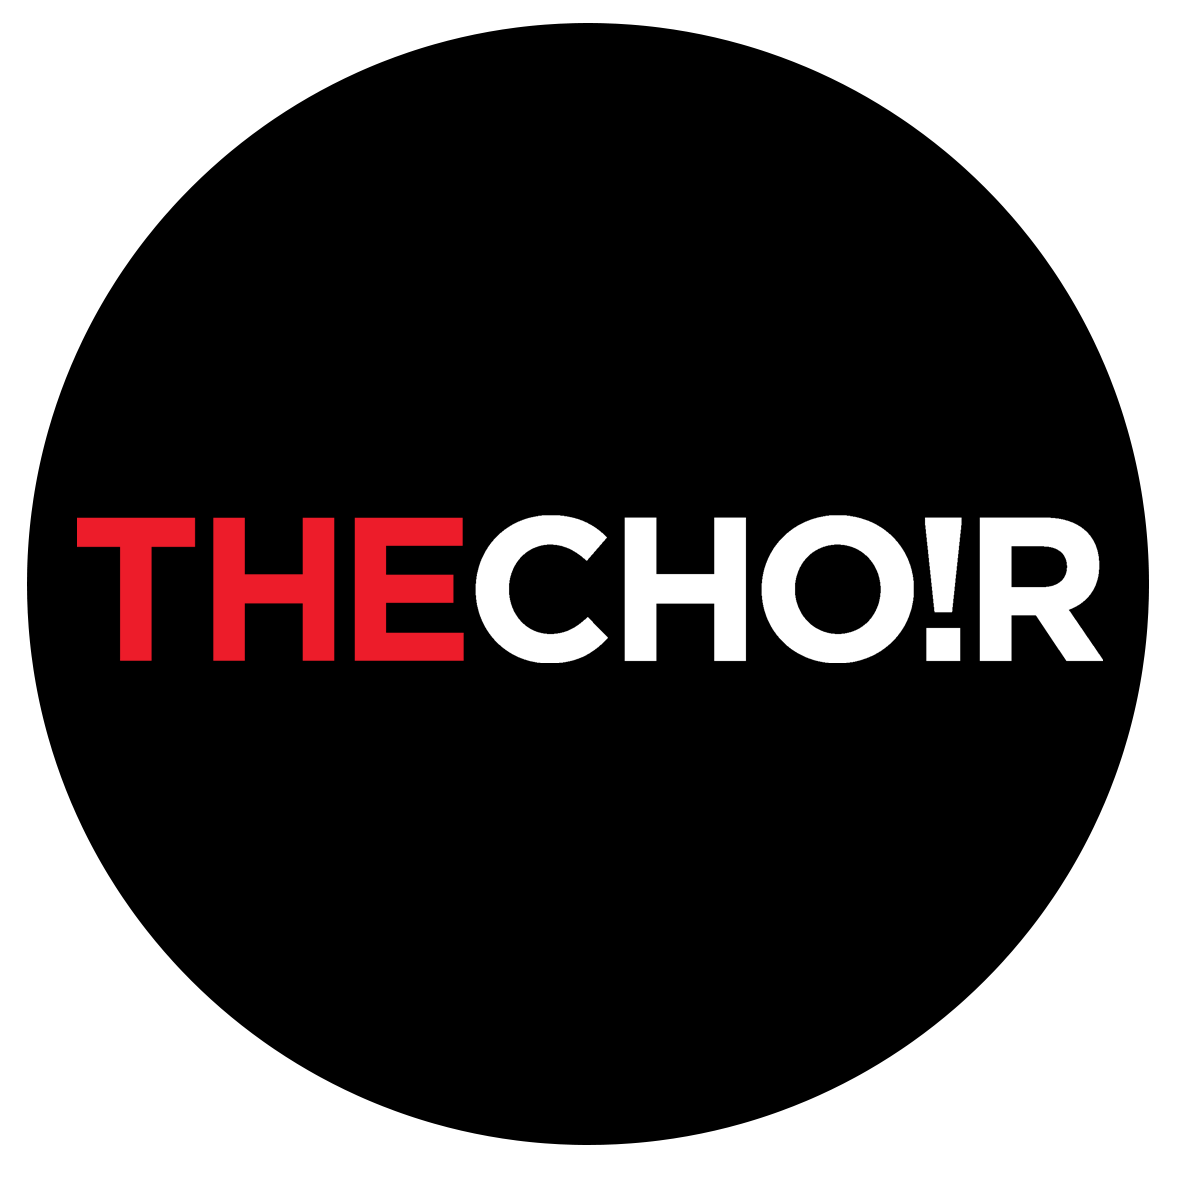 THECHO!R logo in circle.png